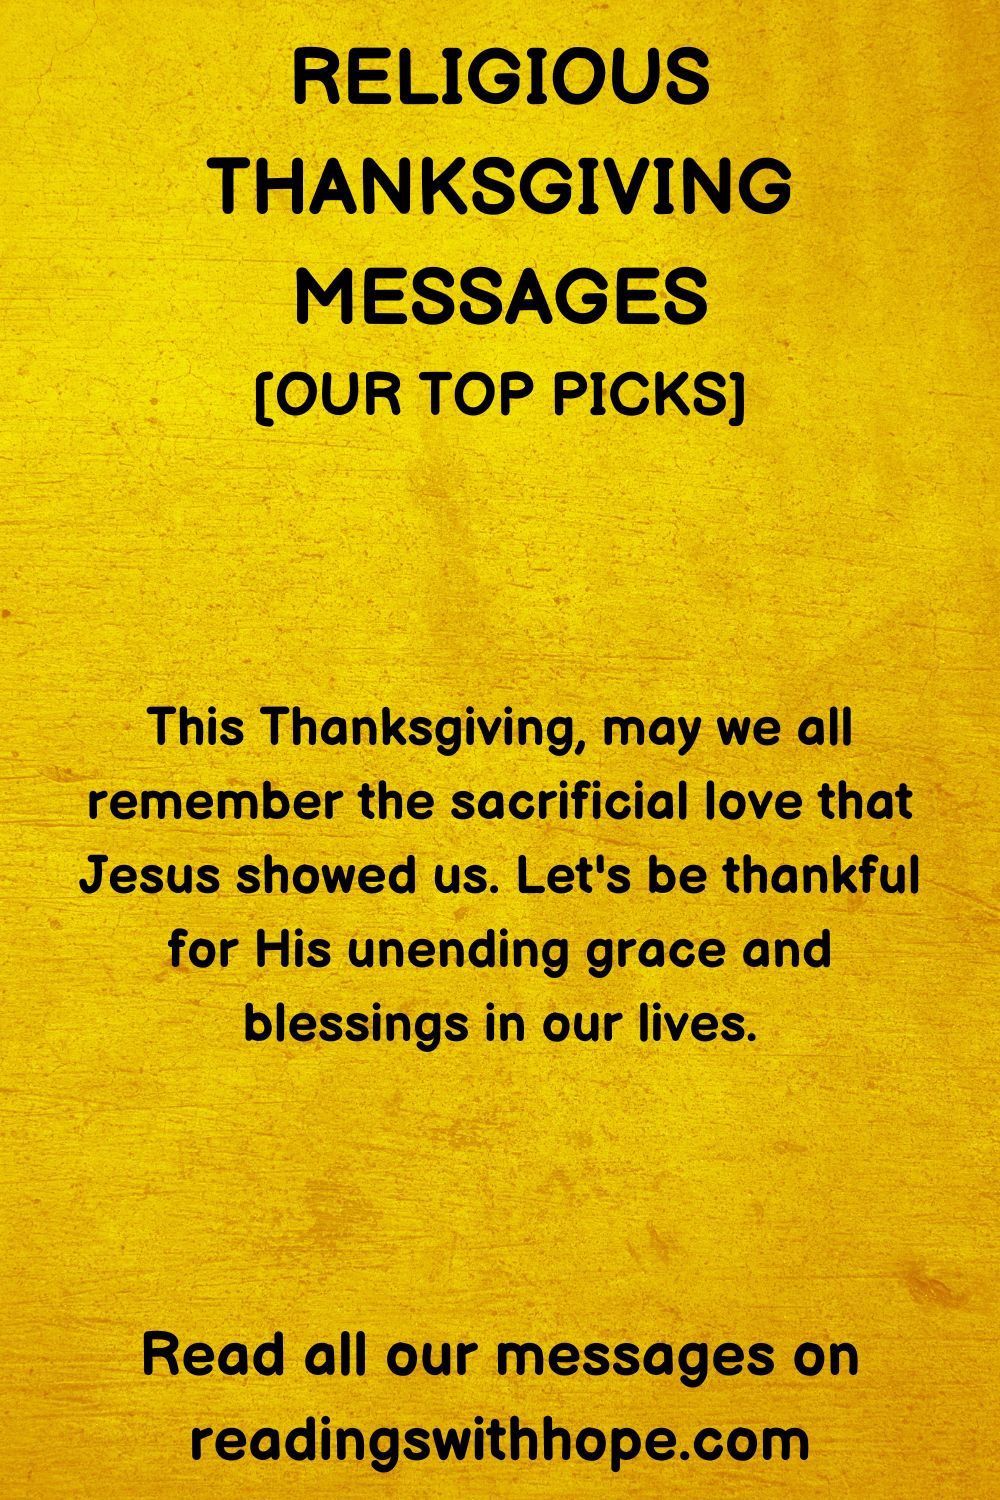 58 Religious Thanksgiving Messages